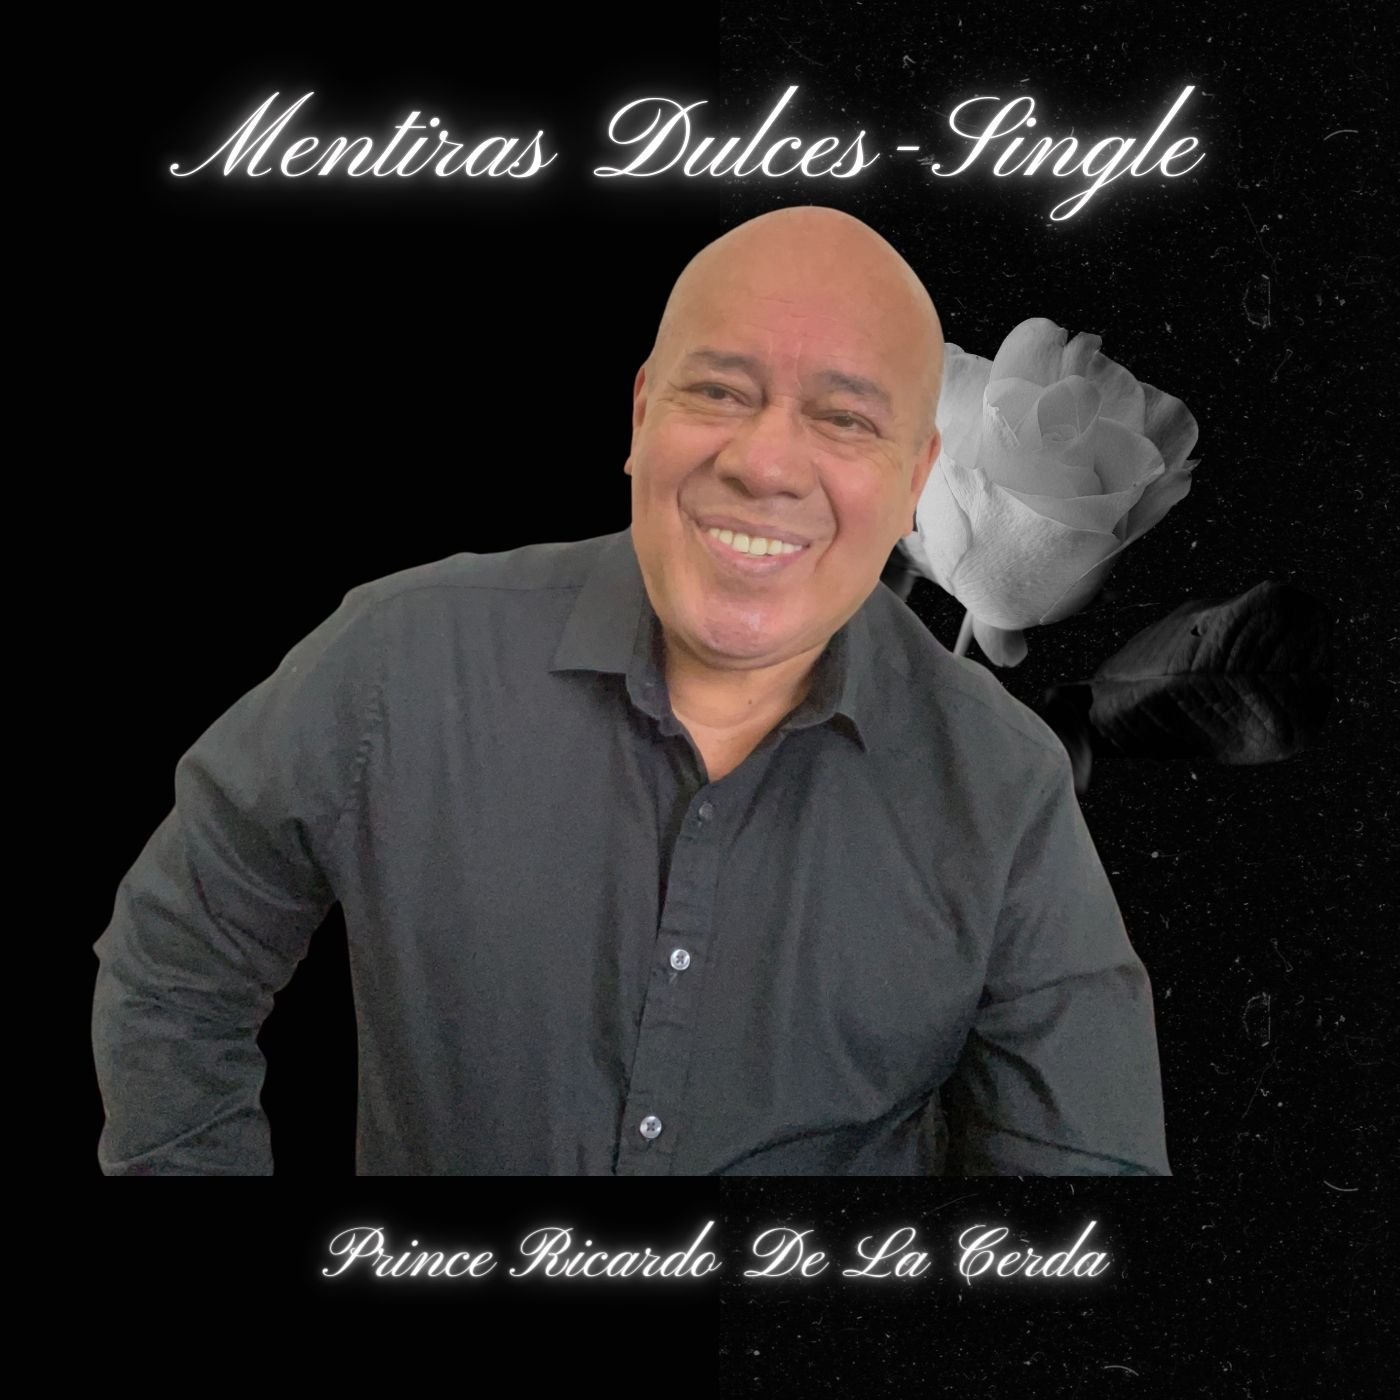 Prince Ricardo de La Cerda Releases Captivating New Single “Mentiras Dulces” from Upcoming Album “Echoes of The Hearth”